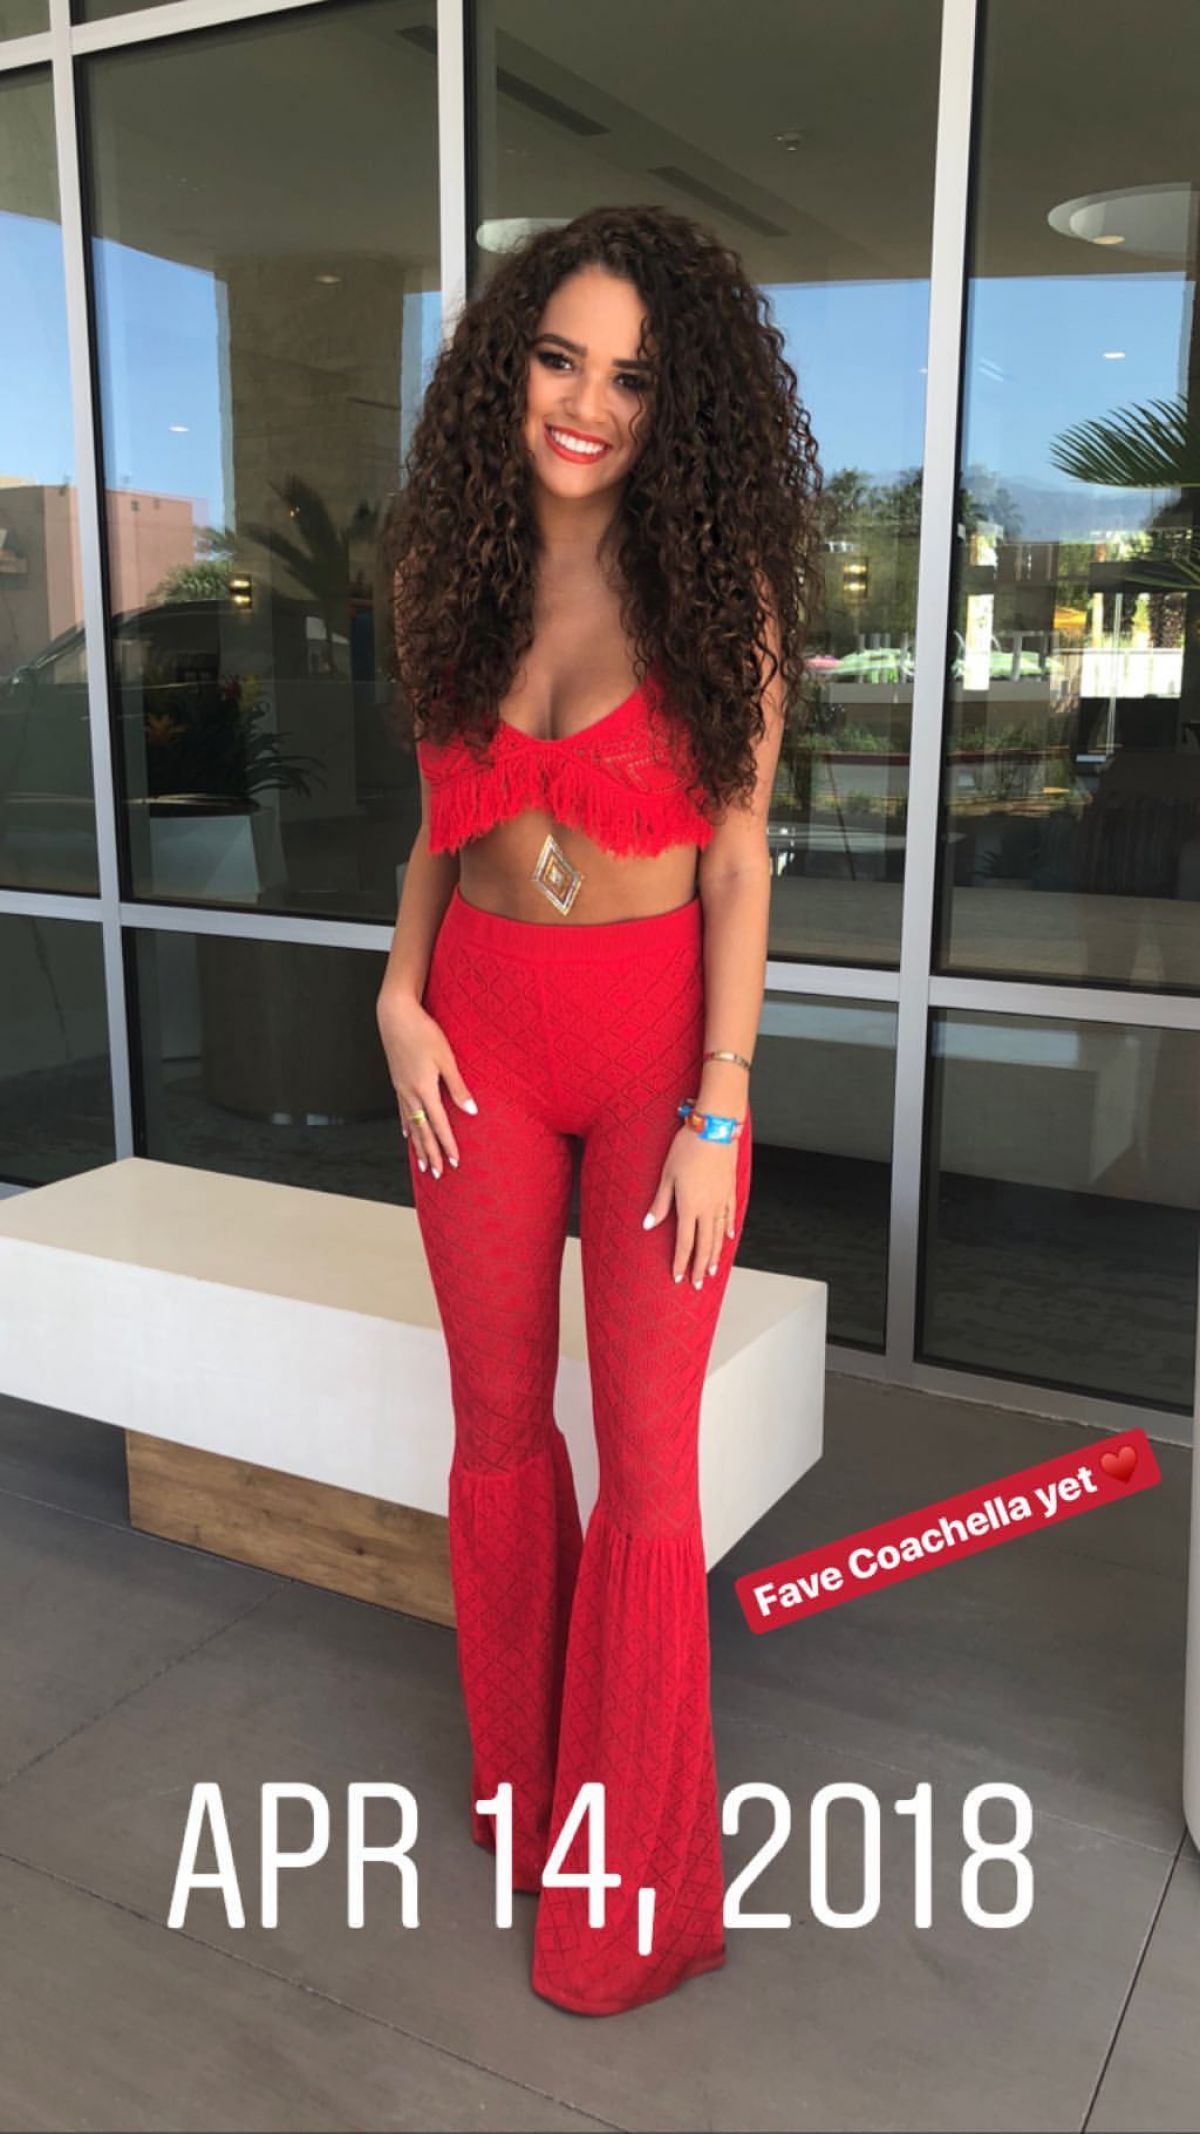 Best Madison Pettis Looks Beautiful As She Poses In Sexy